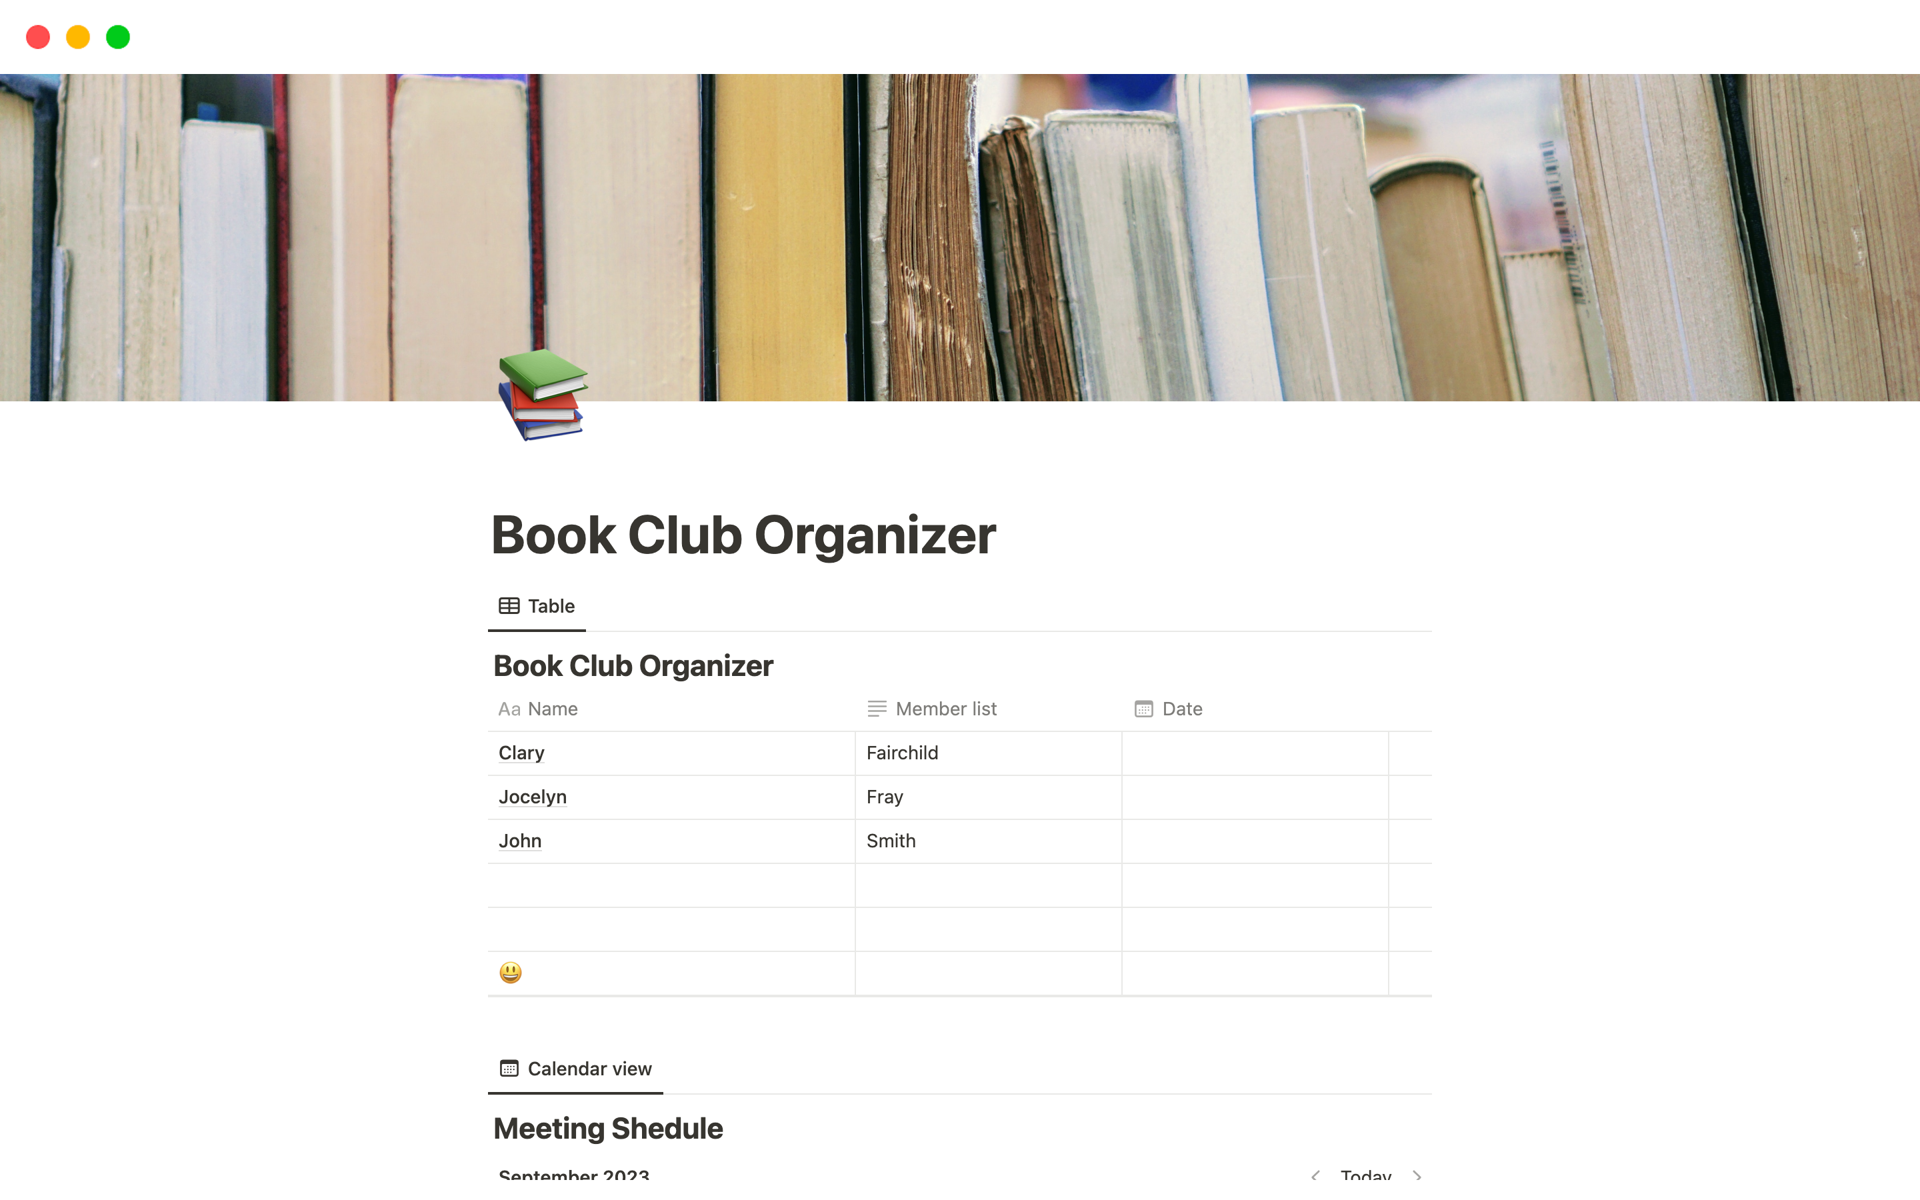 A Book Club Organizer Notion template streamlines book club activities, facilitating reading list management, meeting scheduling, book summary sharing, and book rating and reviews in a collaborative digital space.